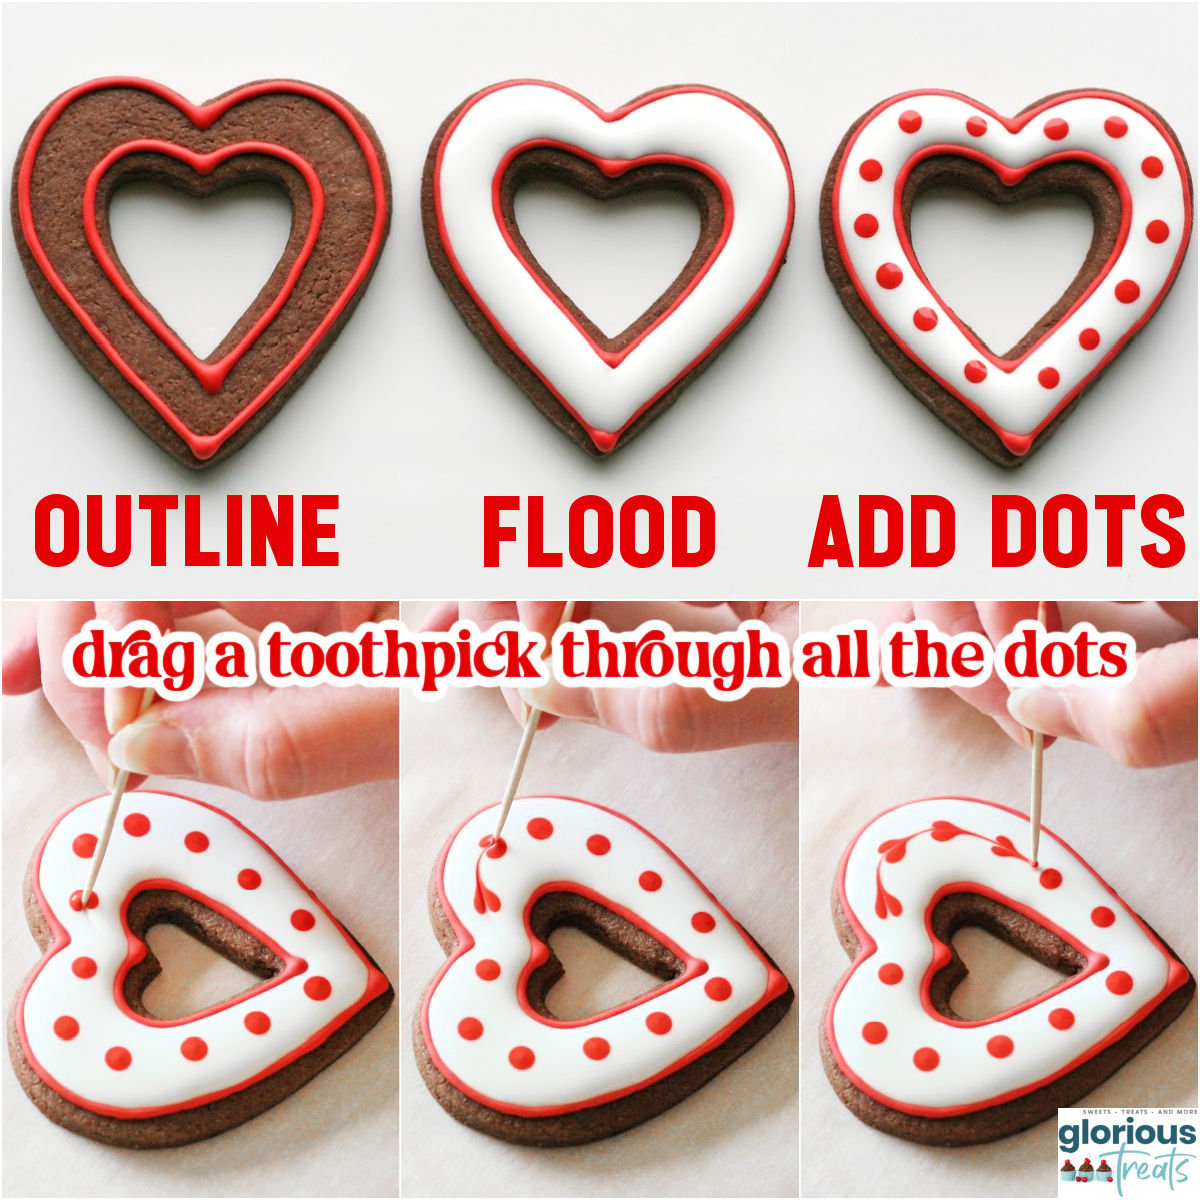 six image collage showing how to use royal icing to create hearts on chocolate heart cookies collage.